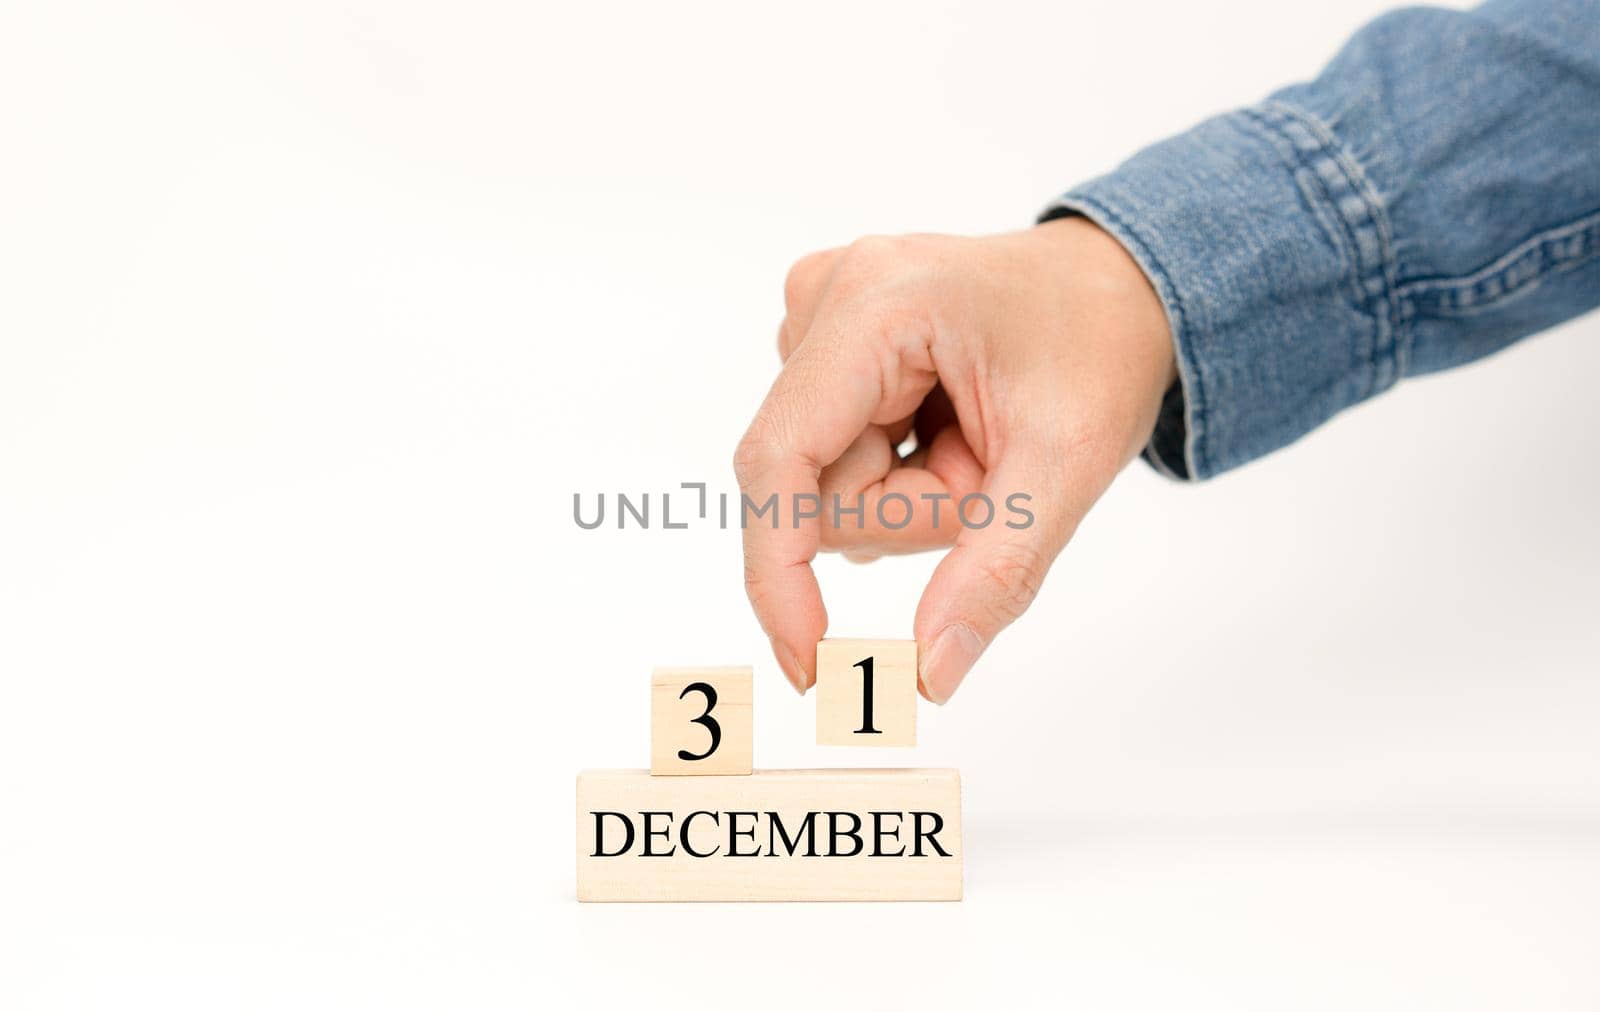 Hand put number 1 for date in December 31 of the last day for year